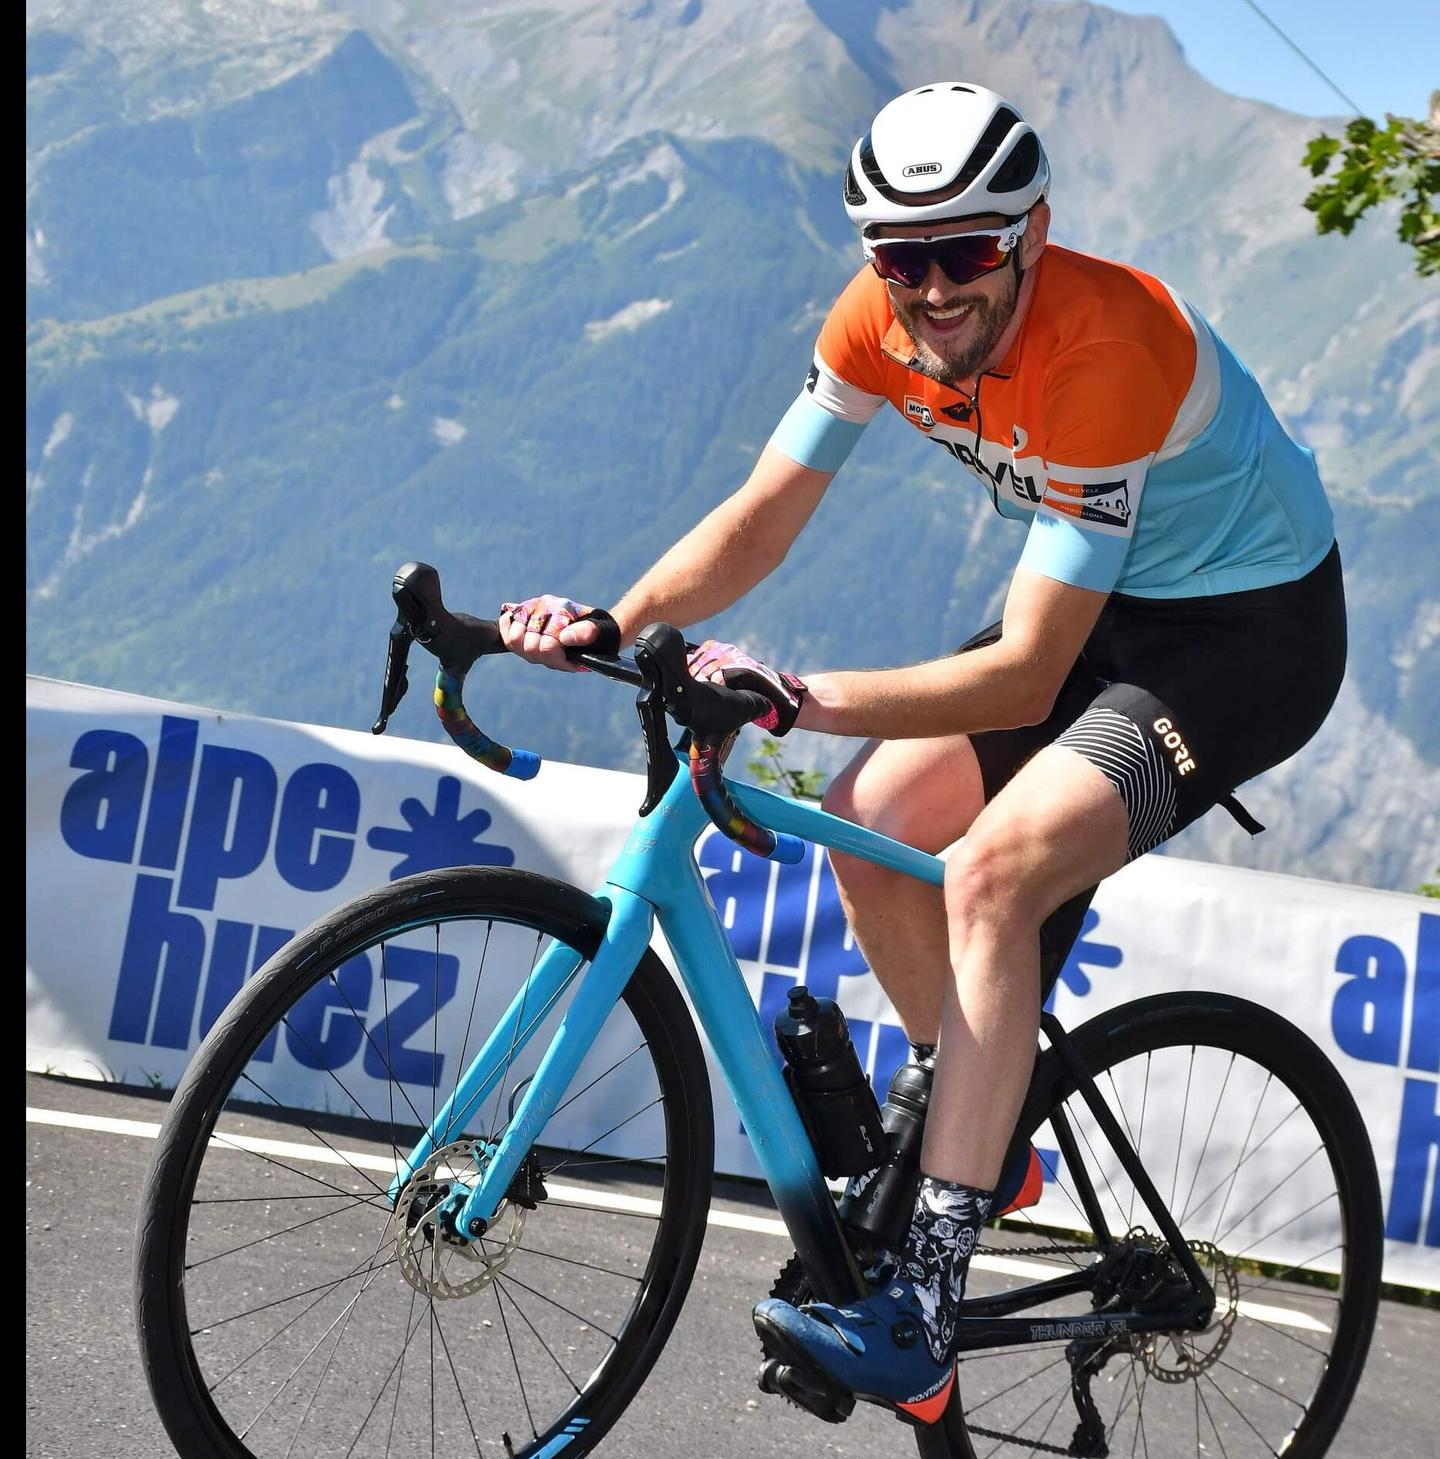 Joyful cyclist ascending Alpe d'Huez, clear blue skies and mountain scenery, cycling challenge in France